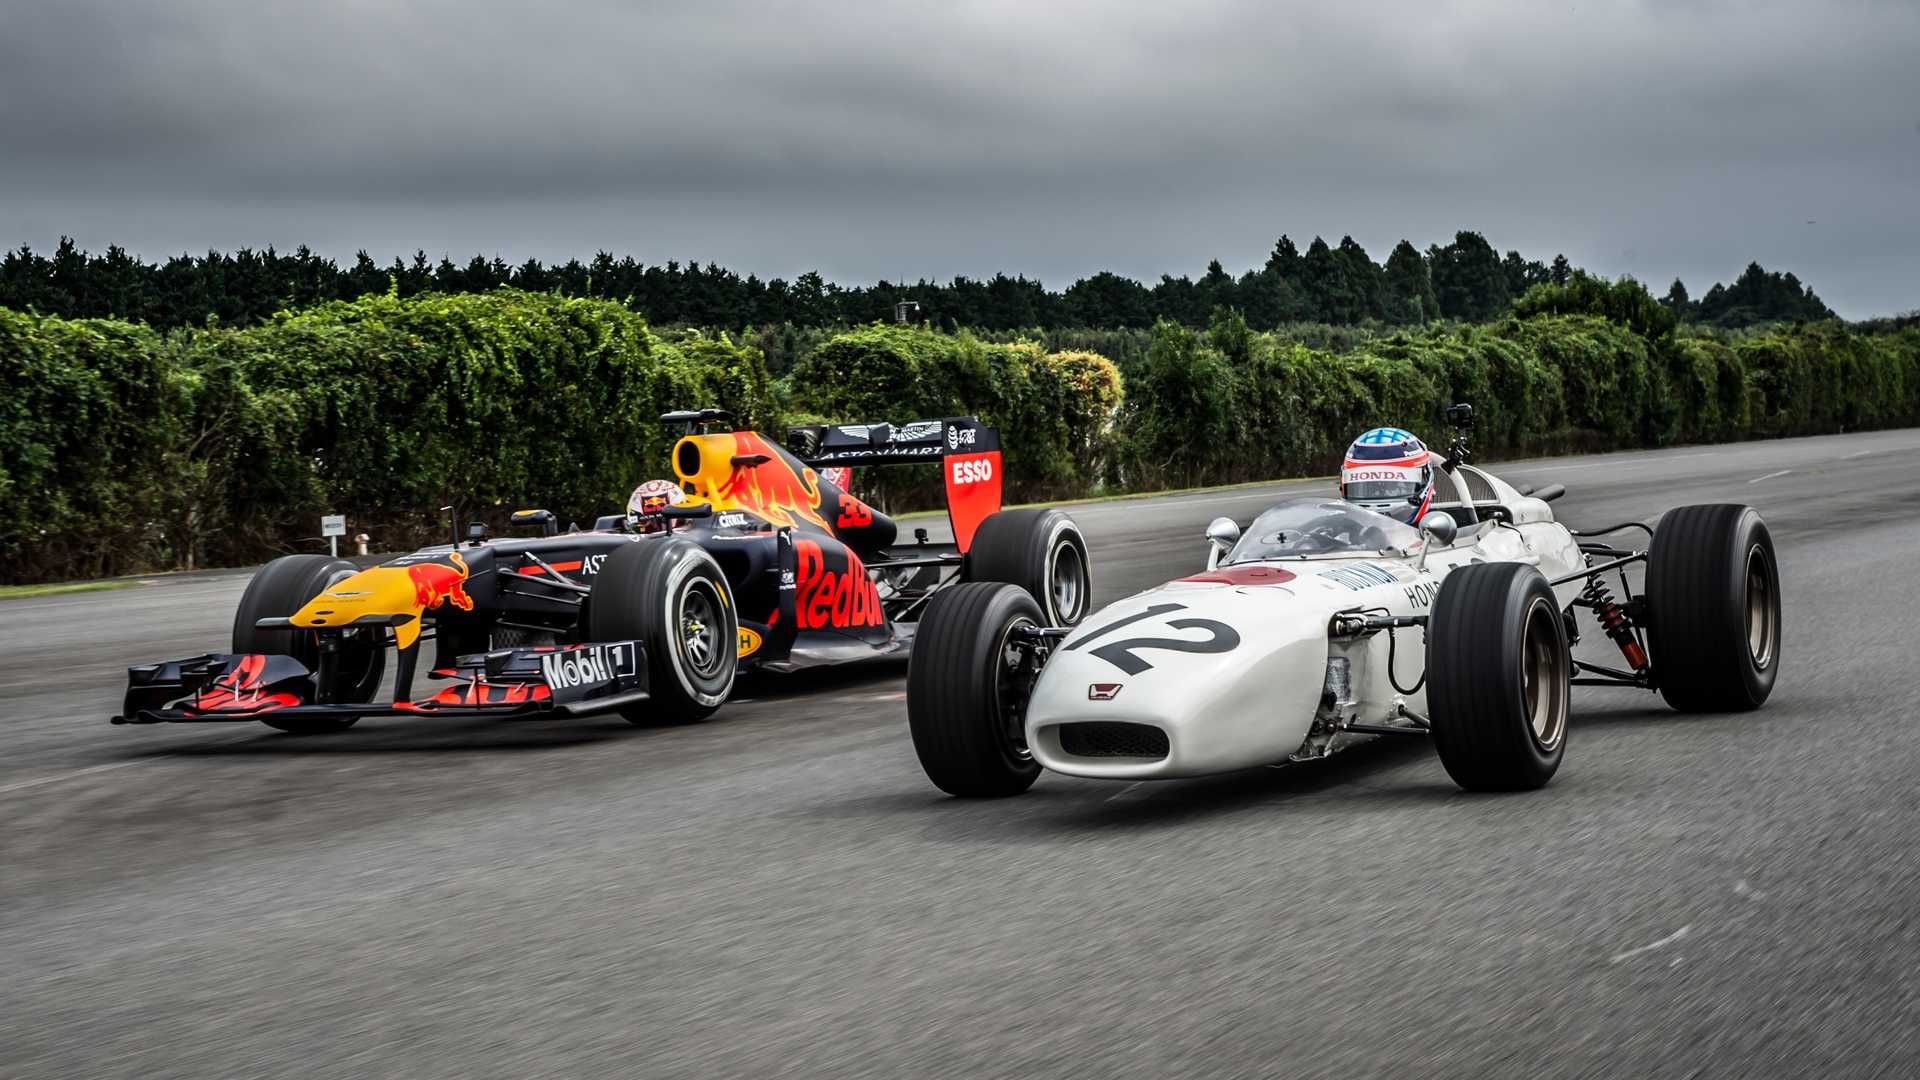 Honda's 1960s F1 racer side by side with a modern Honda F1 car